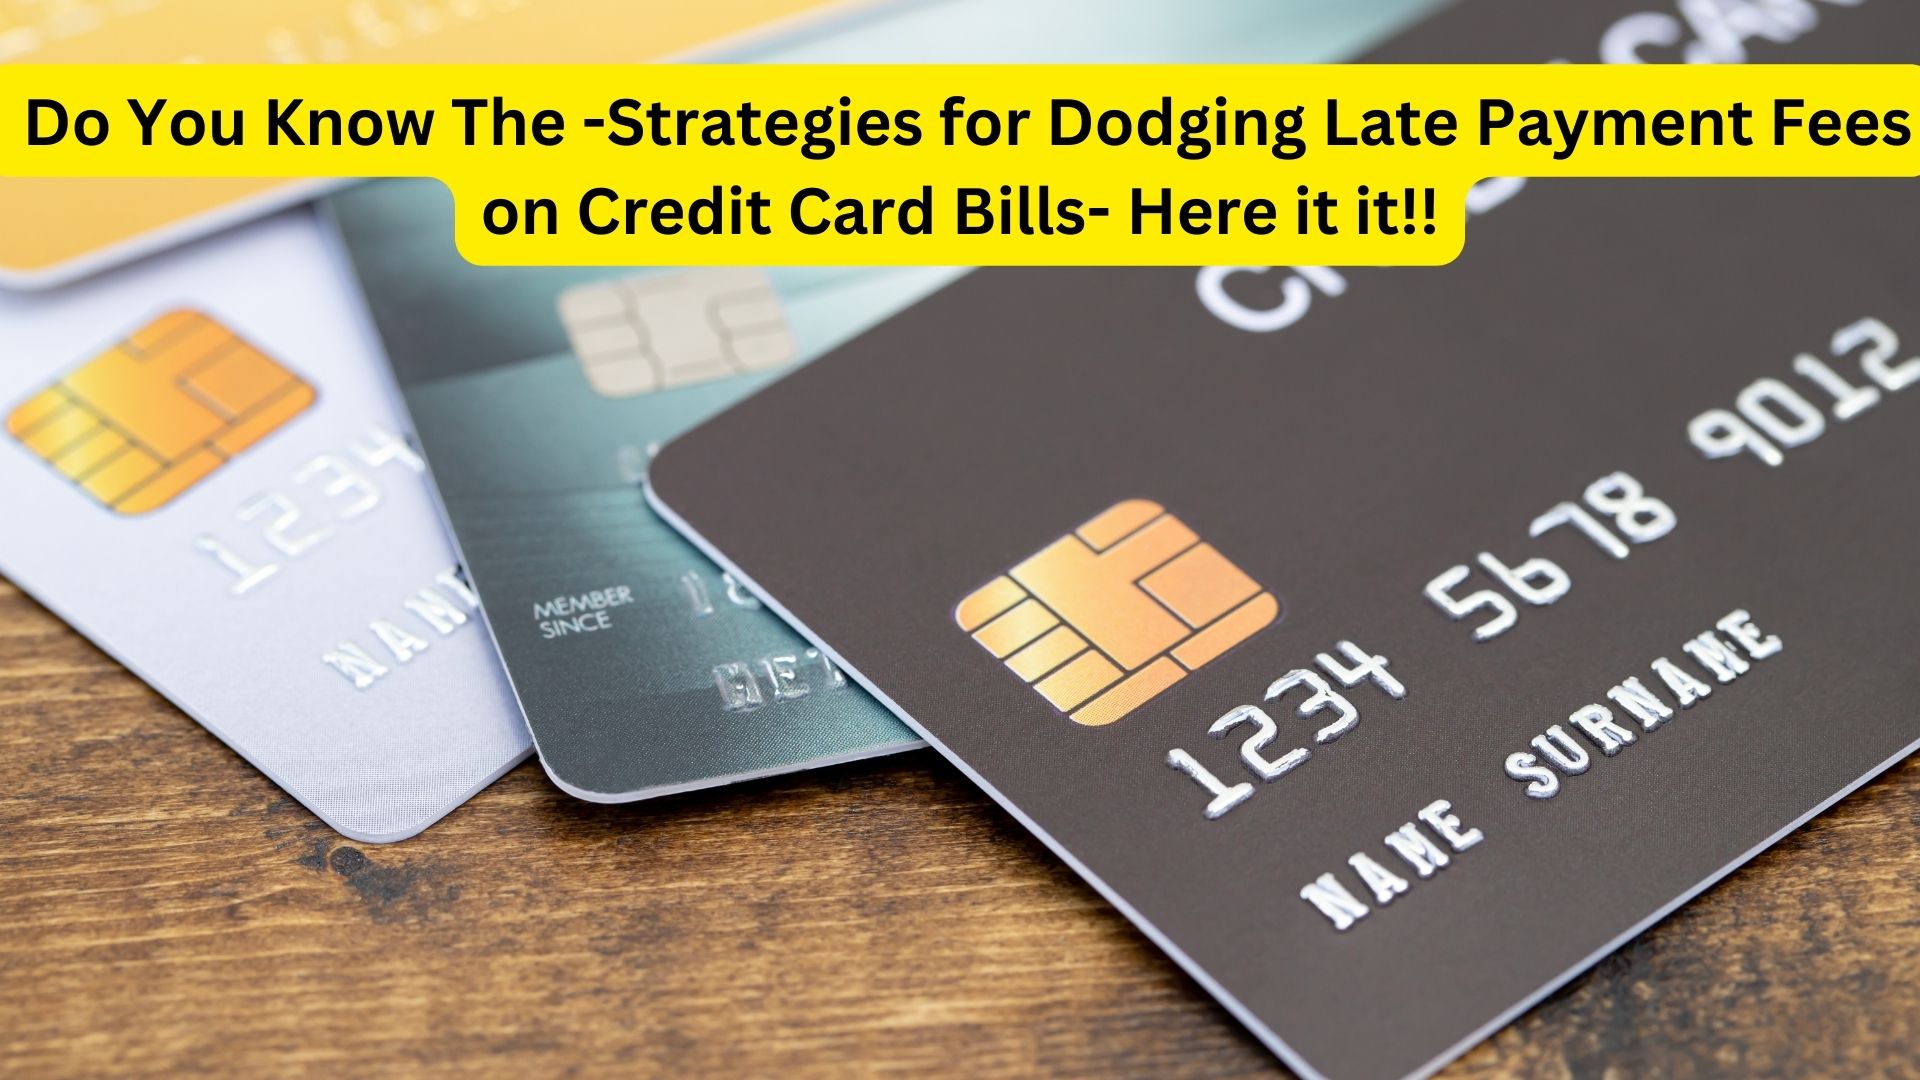 Do You Know The -Strategies for Dodging Late Payment Fees on Credit Card Bills- Here it it!!